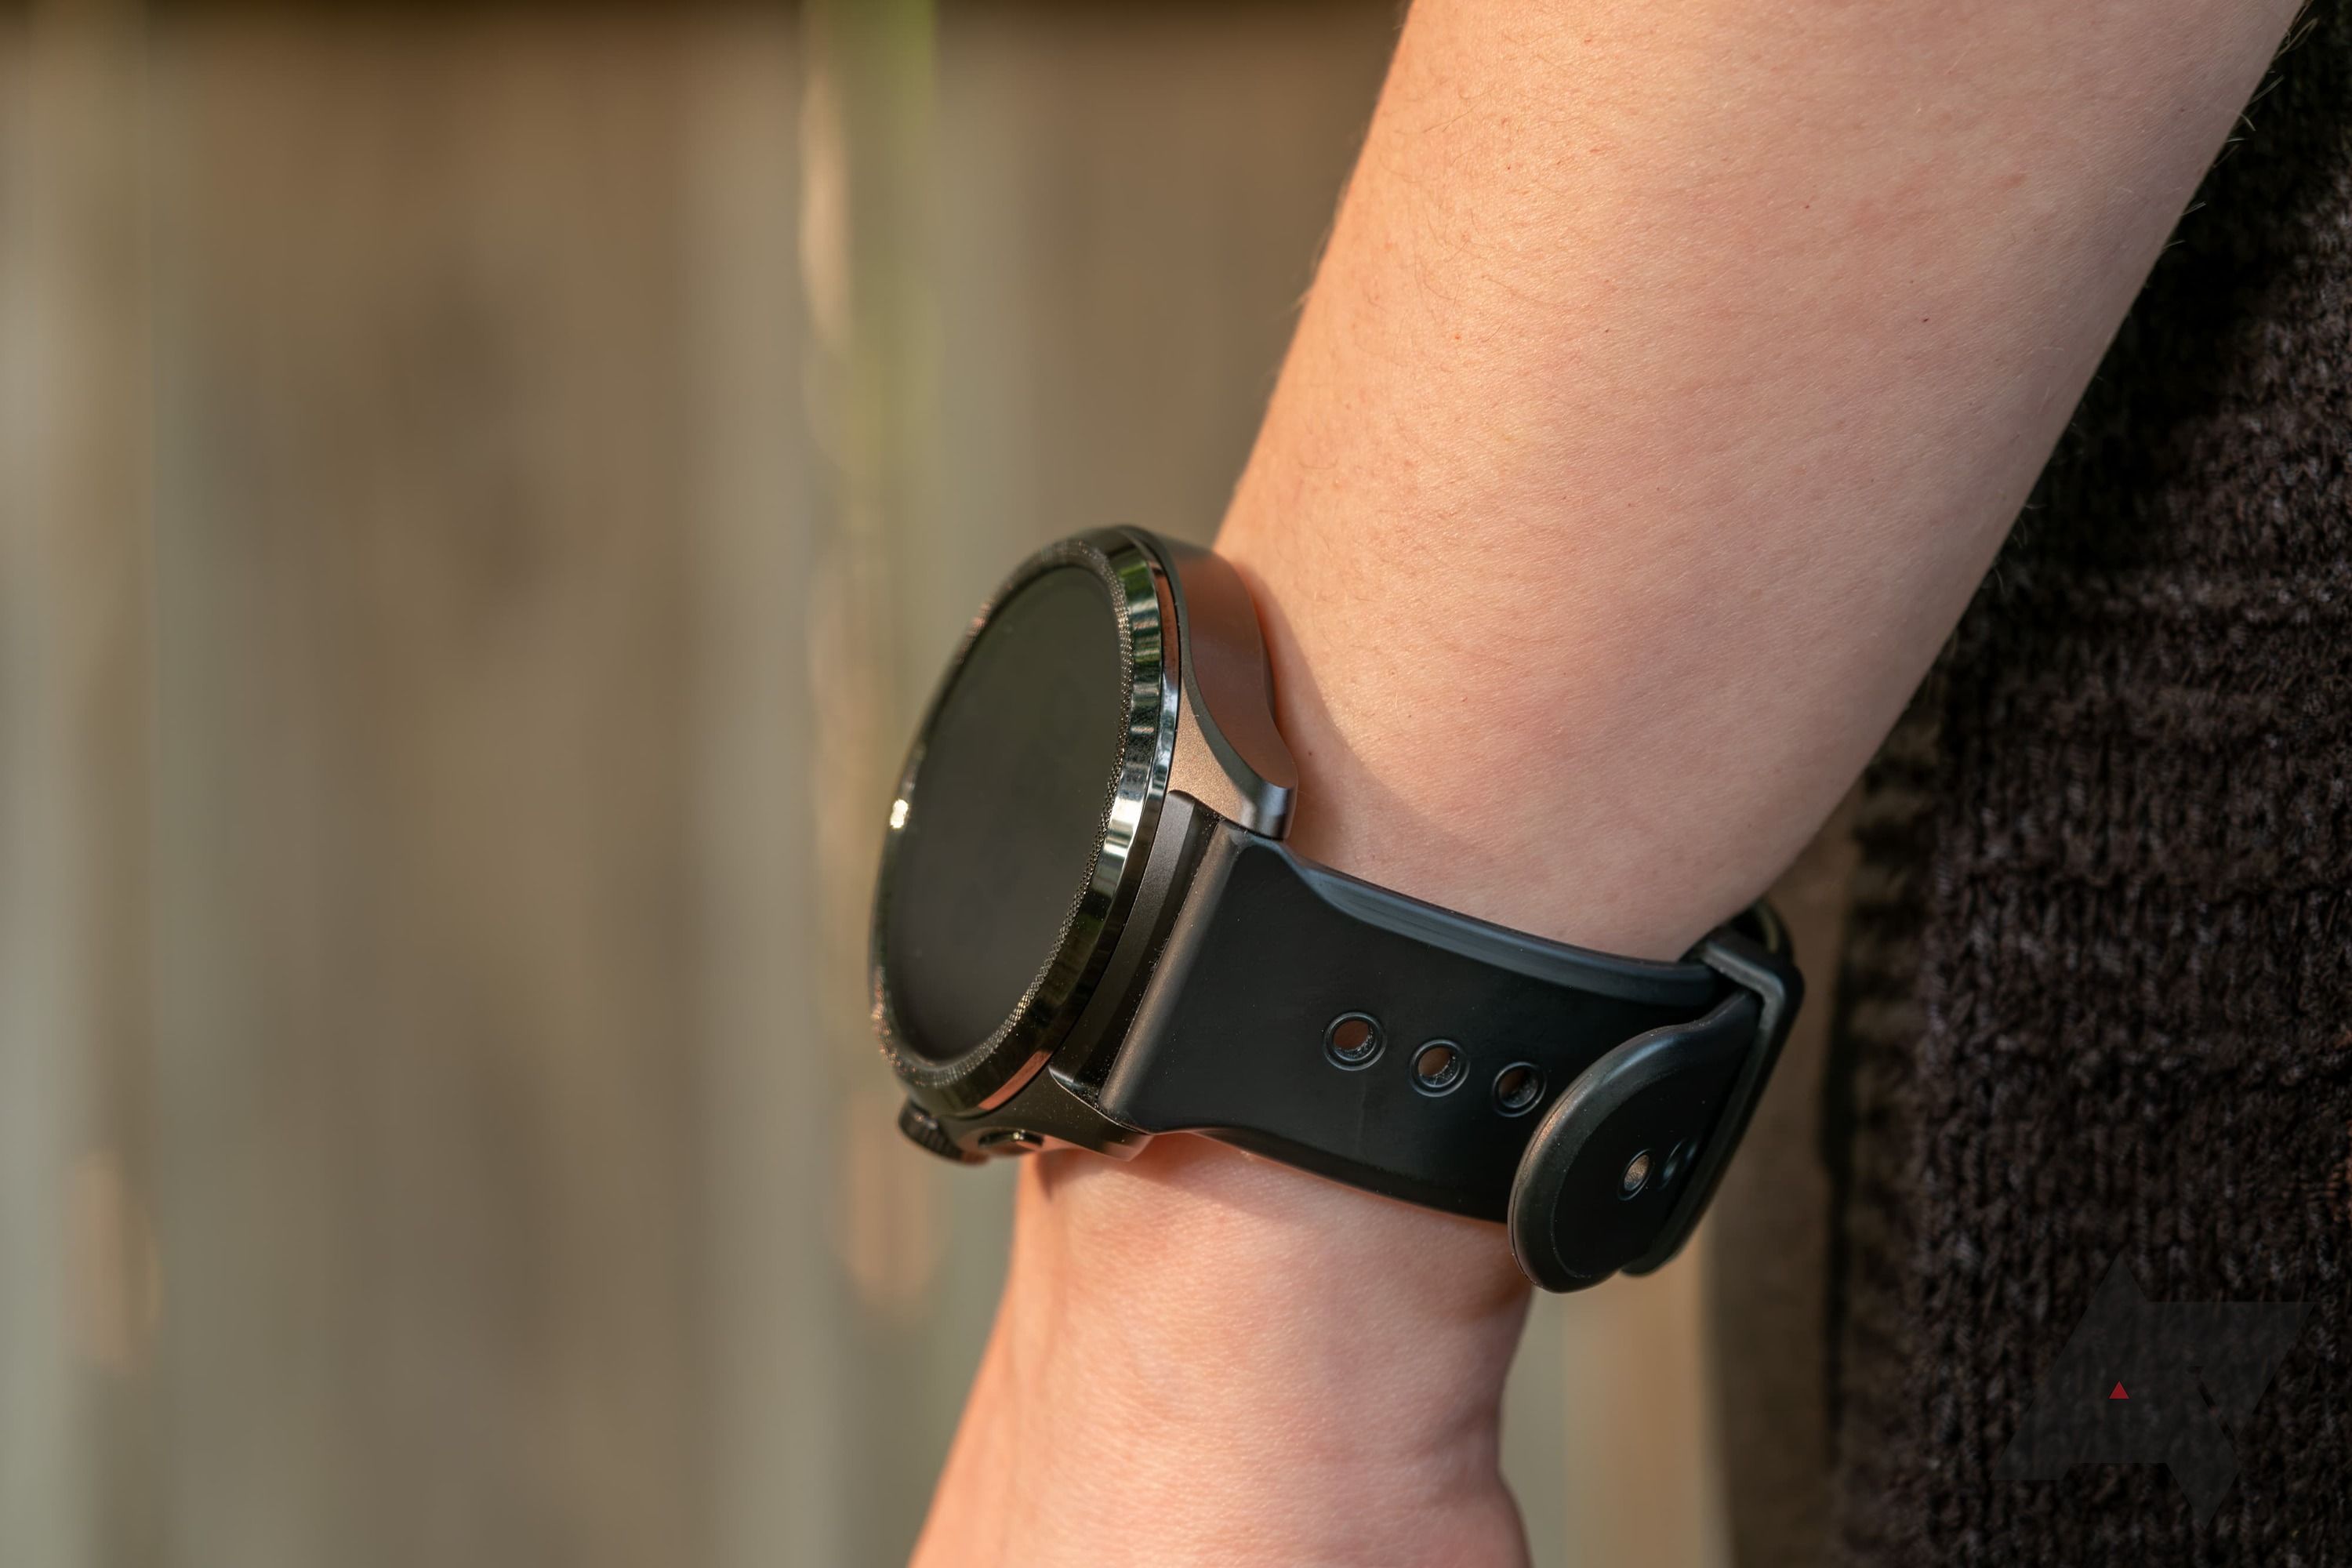 TicWatch Pro 5 Review: Is this the best Wear OS smartwatch right now?